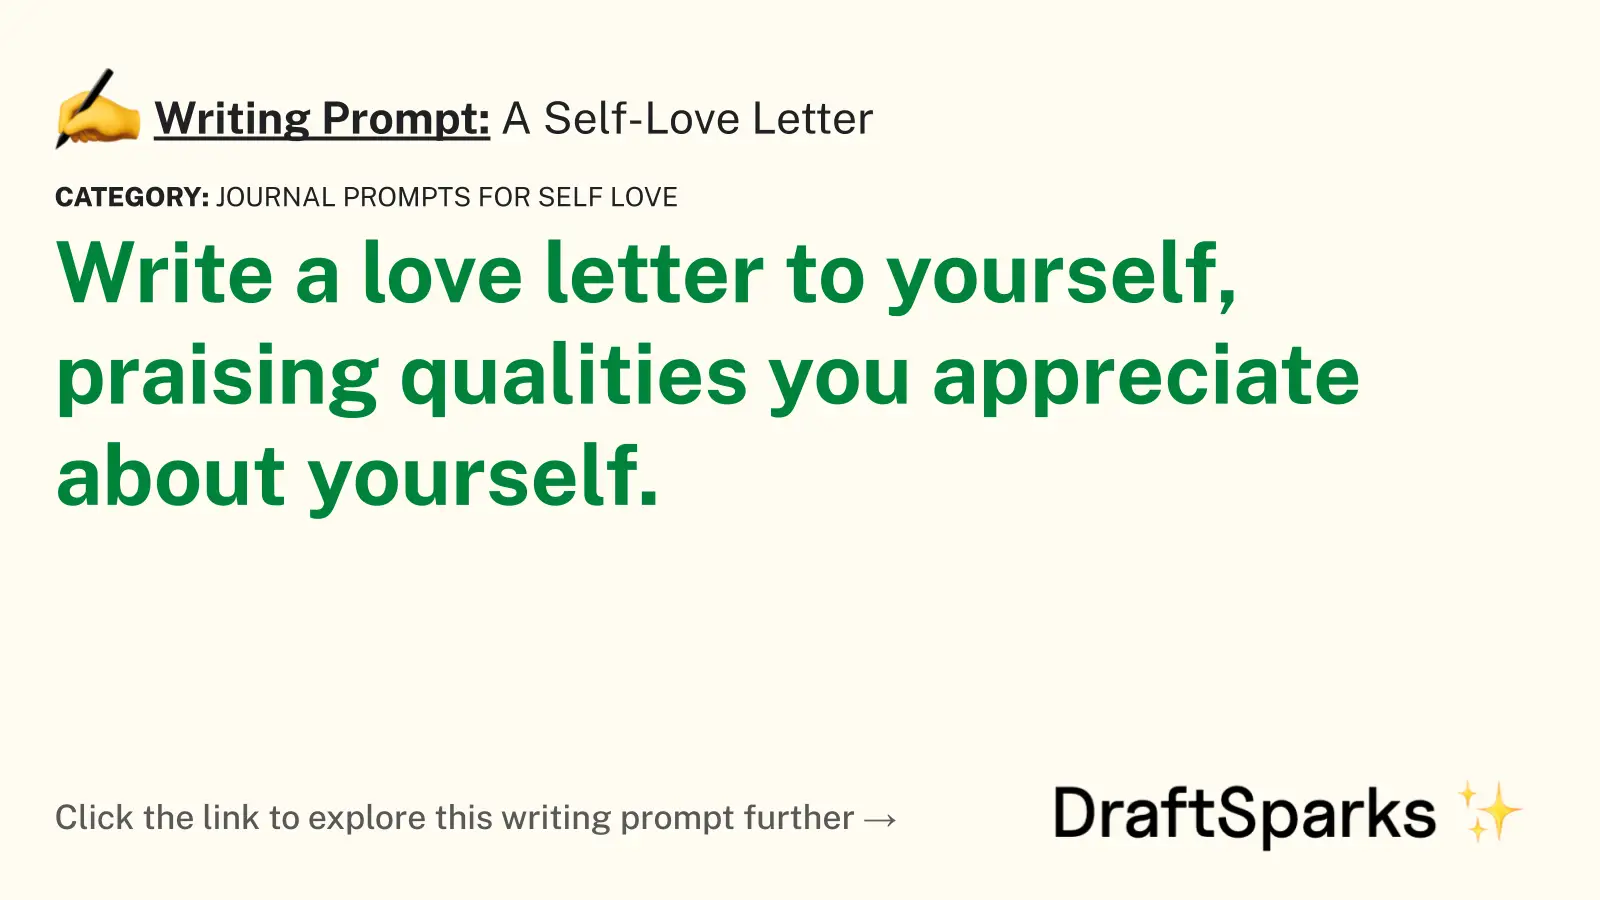 A Self-Love Letter